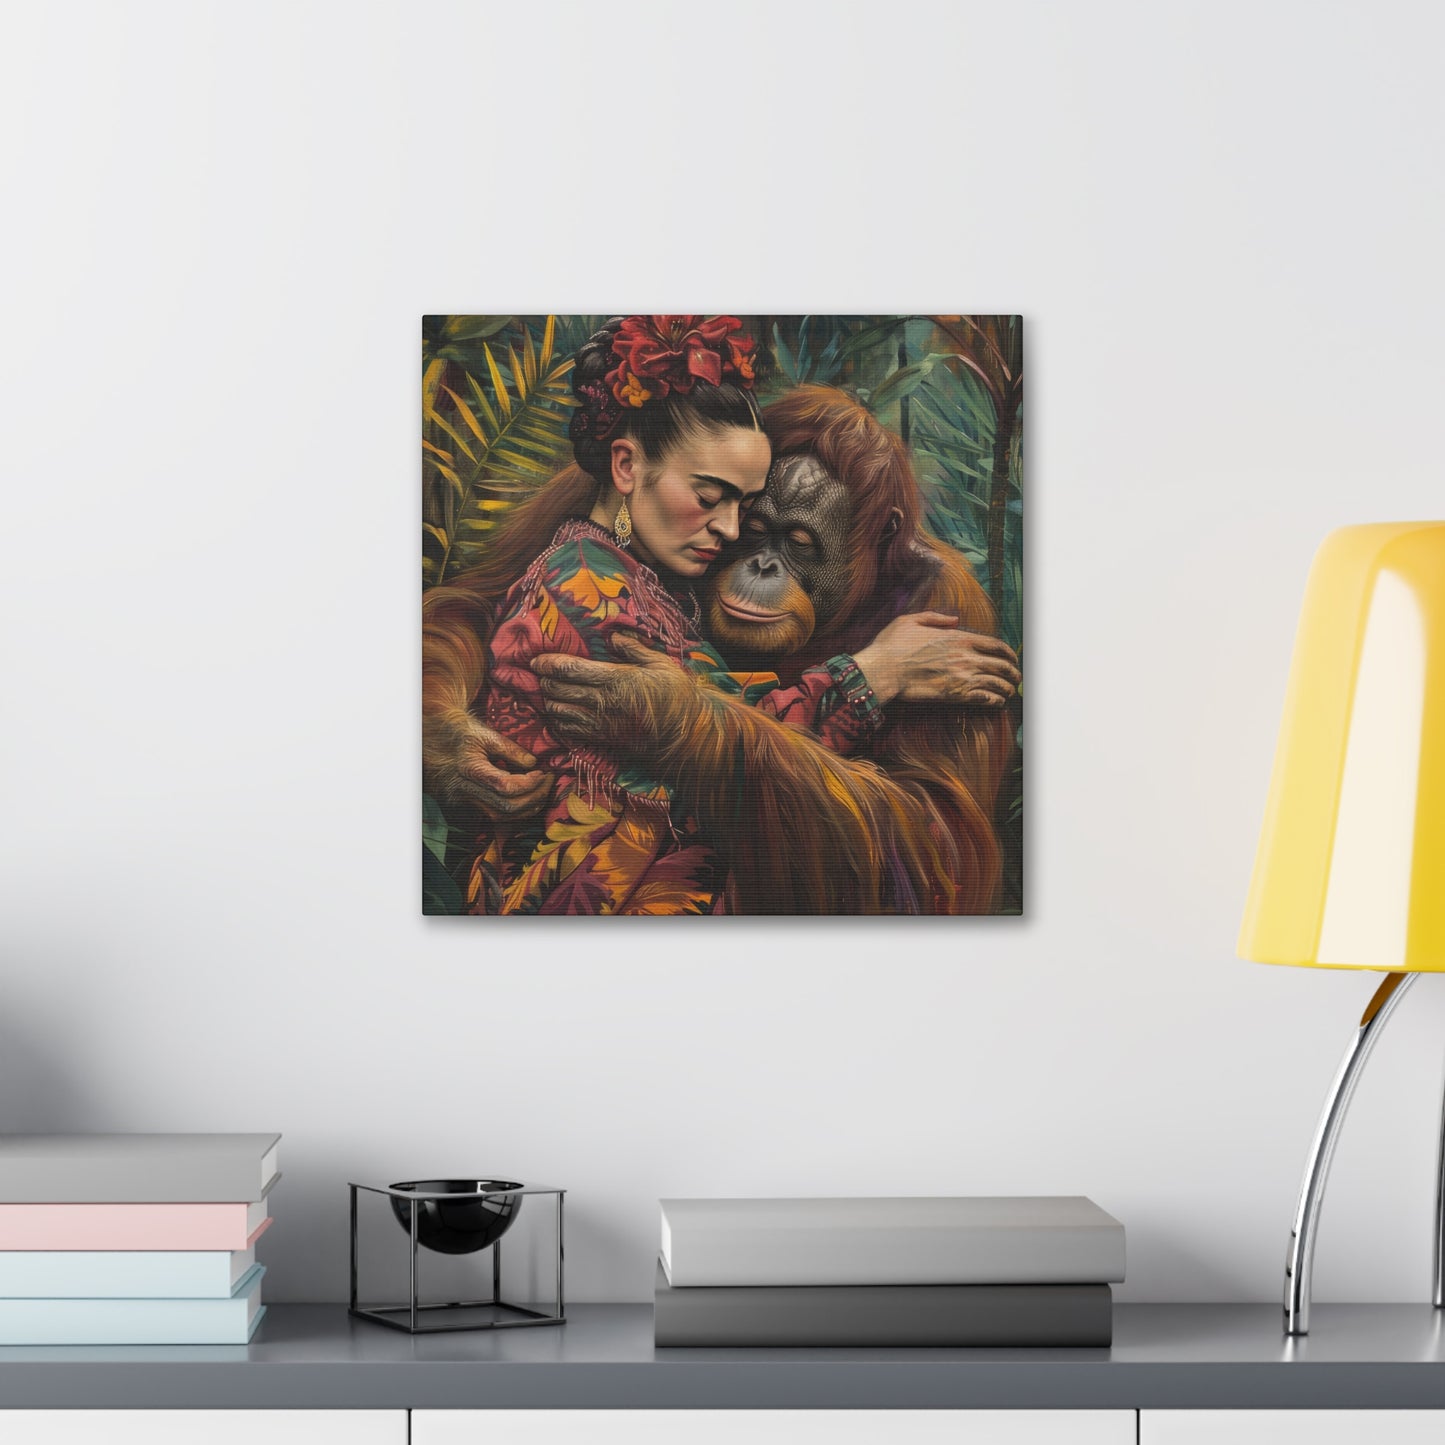 Conservation themed painting of a woman embracing an orangutan by David Miller, Embrace of the Wild, hung on a wall above a modern sideboard by Printify.